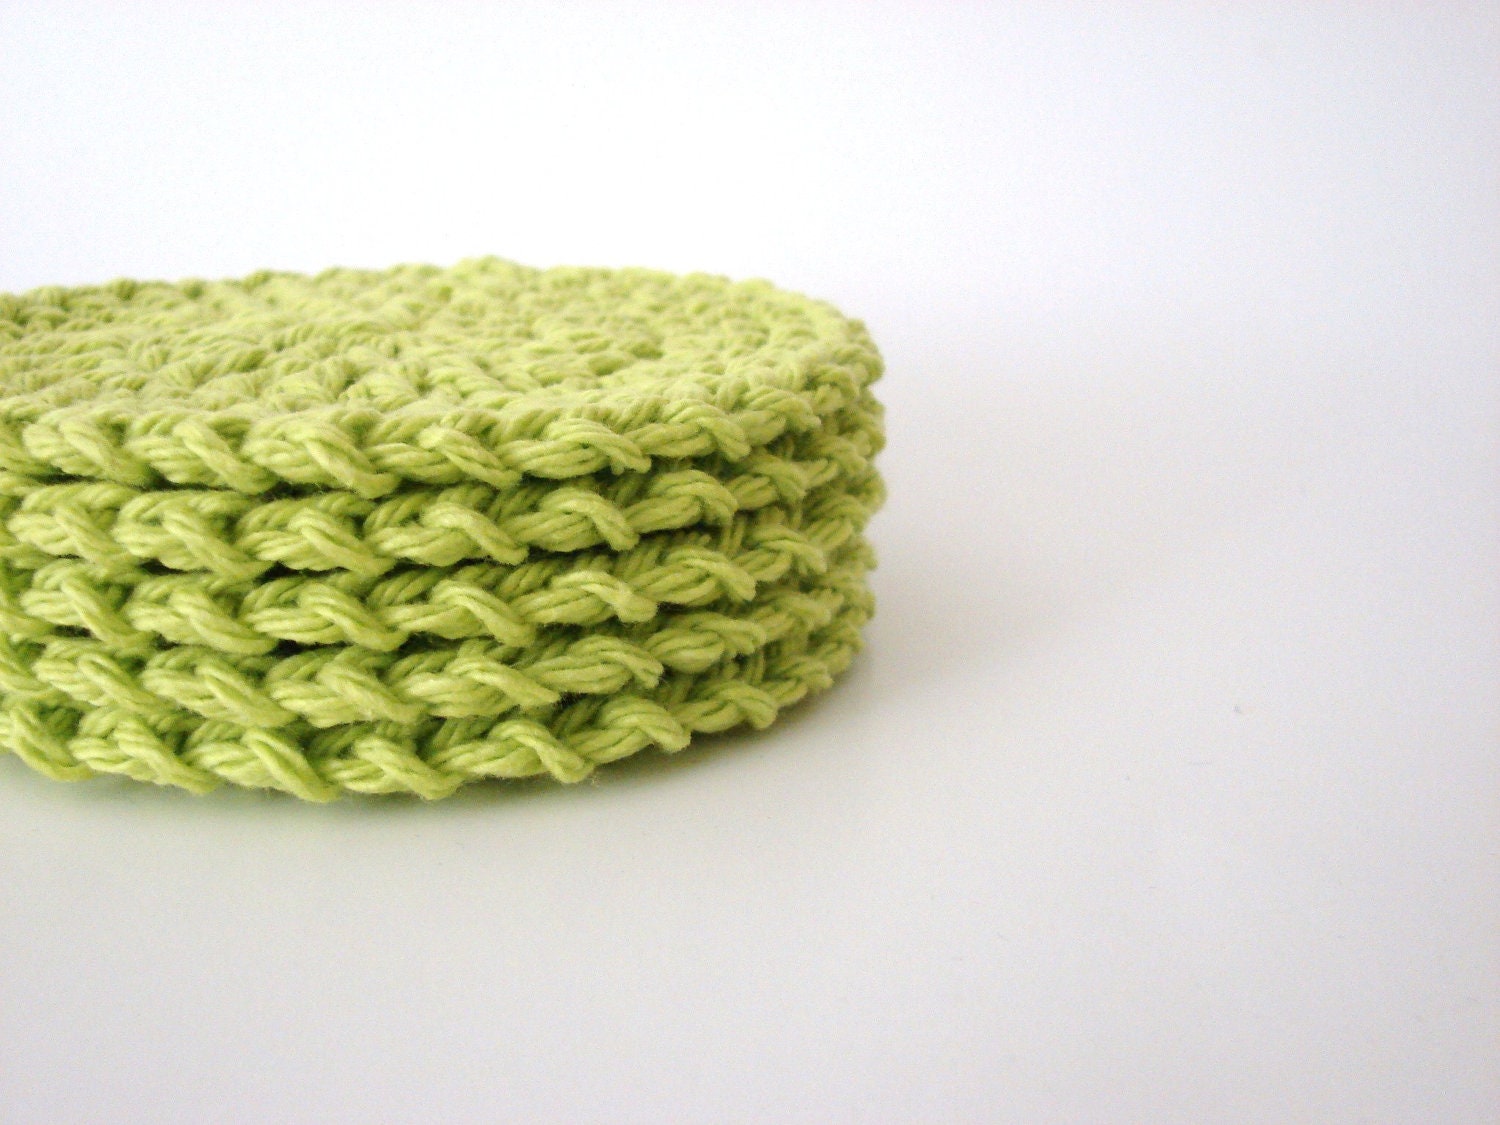 Crochet Face Scrubbies Bright Green Reusable Cotton Rounds Set of 5 - MADE TO ORDER, Bathroom Home - MyHobbyShop